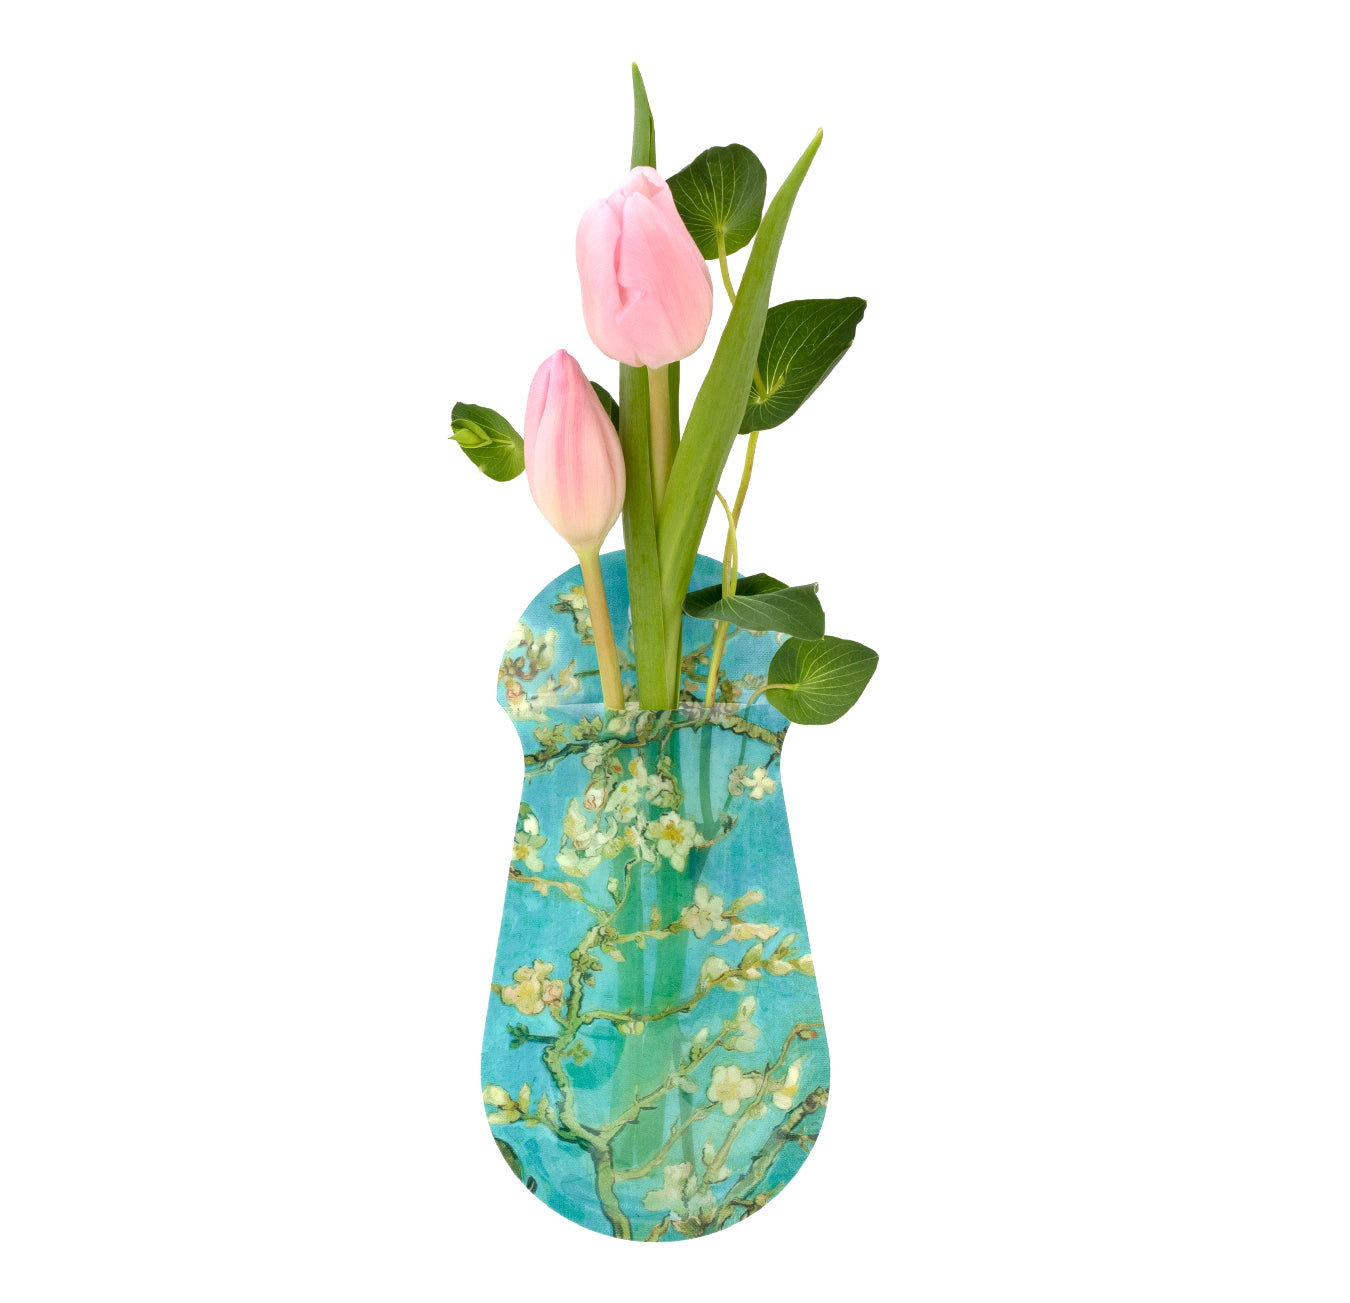 Modgy Van Suction Gogh Almond Cup Vase Blossom -